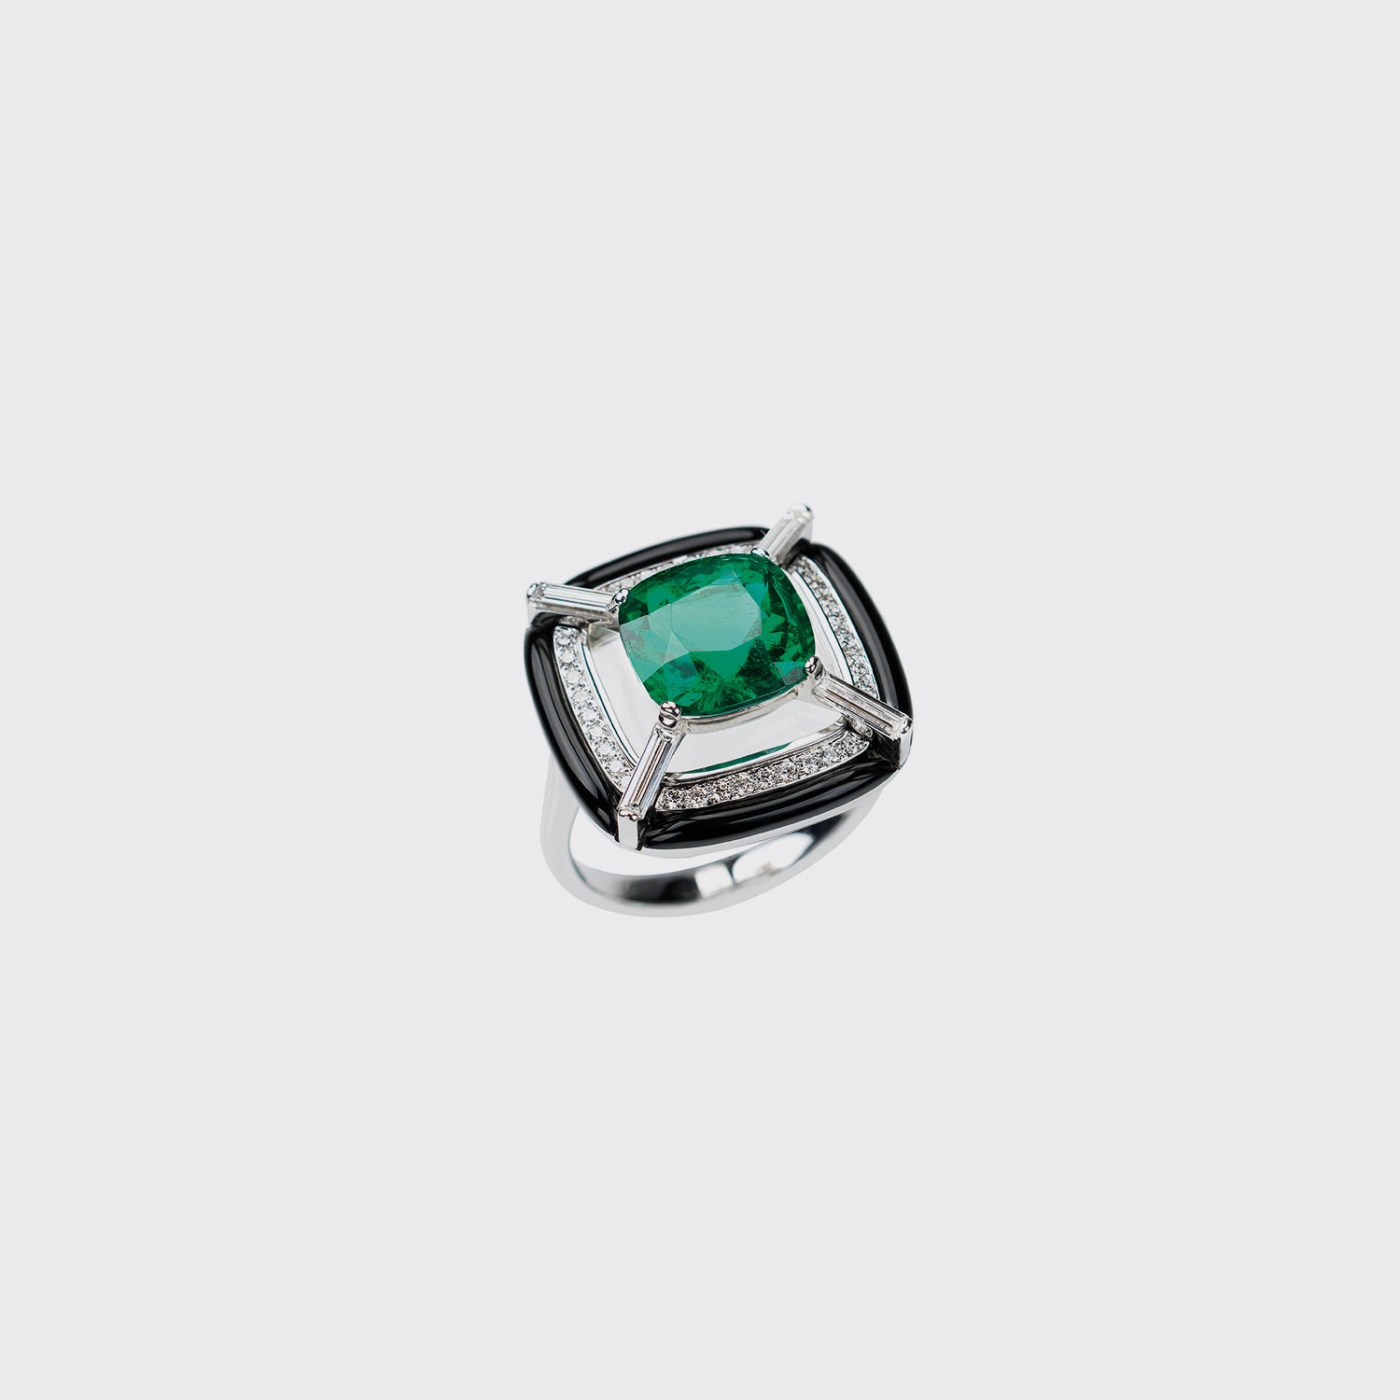 White gold ring with emerald and white diamond baguettes and black enamel